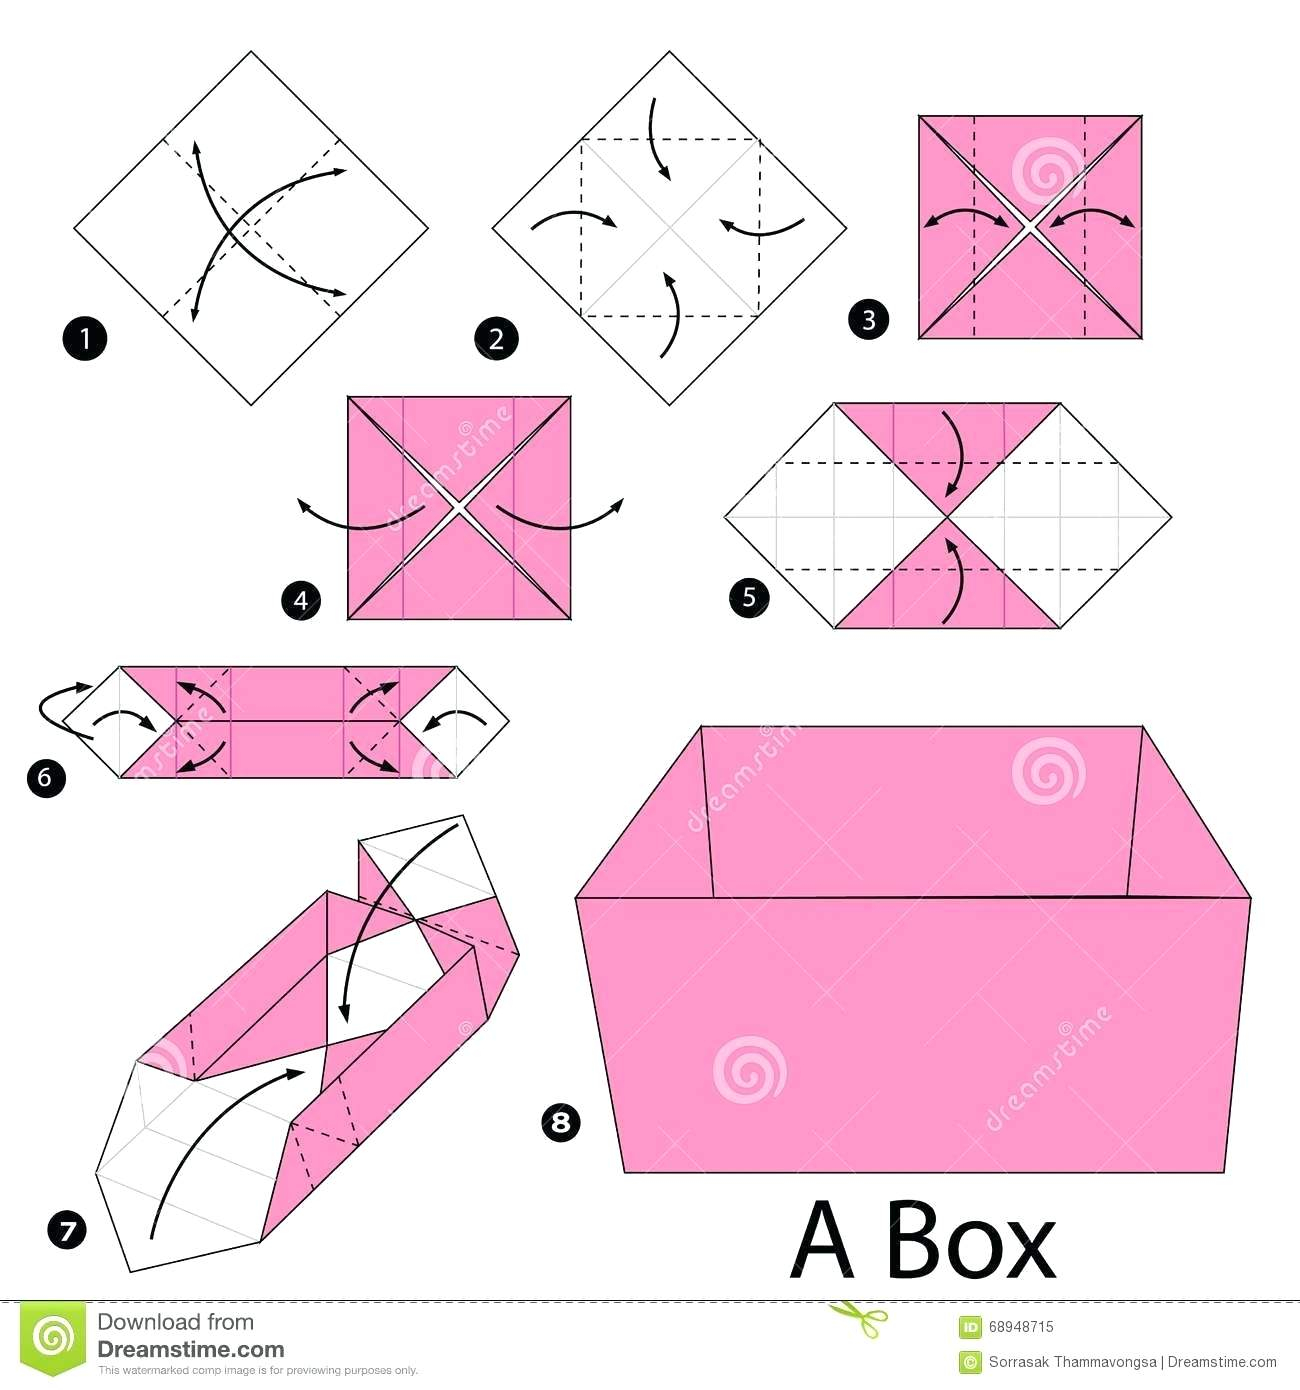 How To Do A Origami Box How To Make An Origami Box Step Step Instructions How To Make